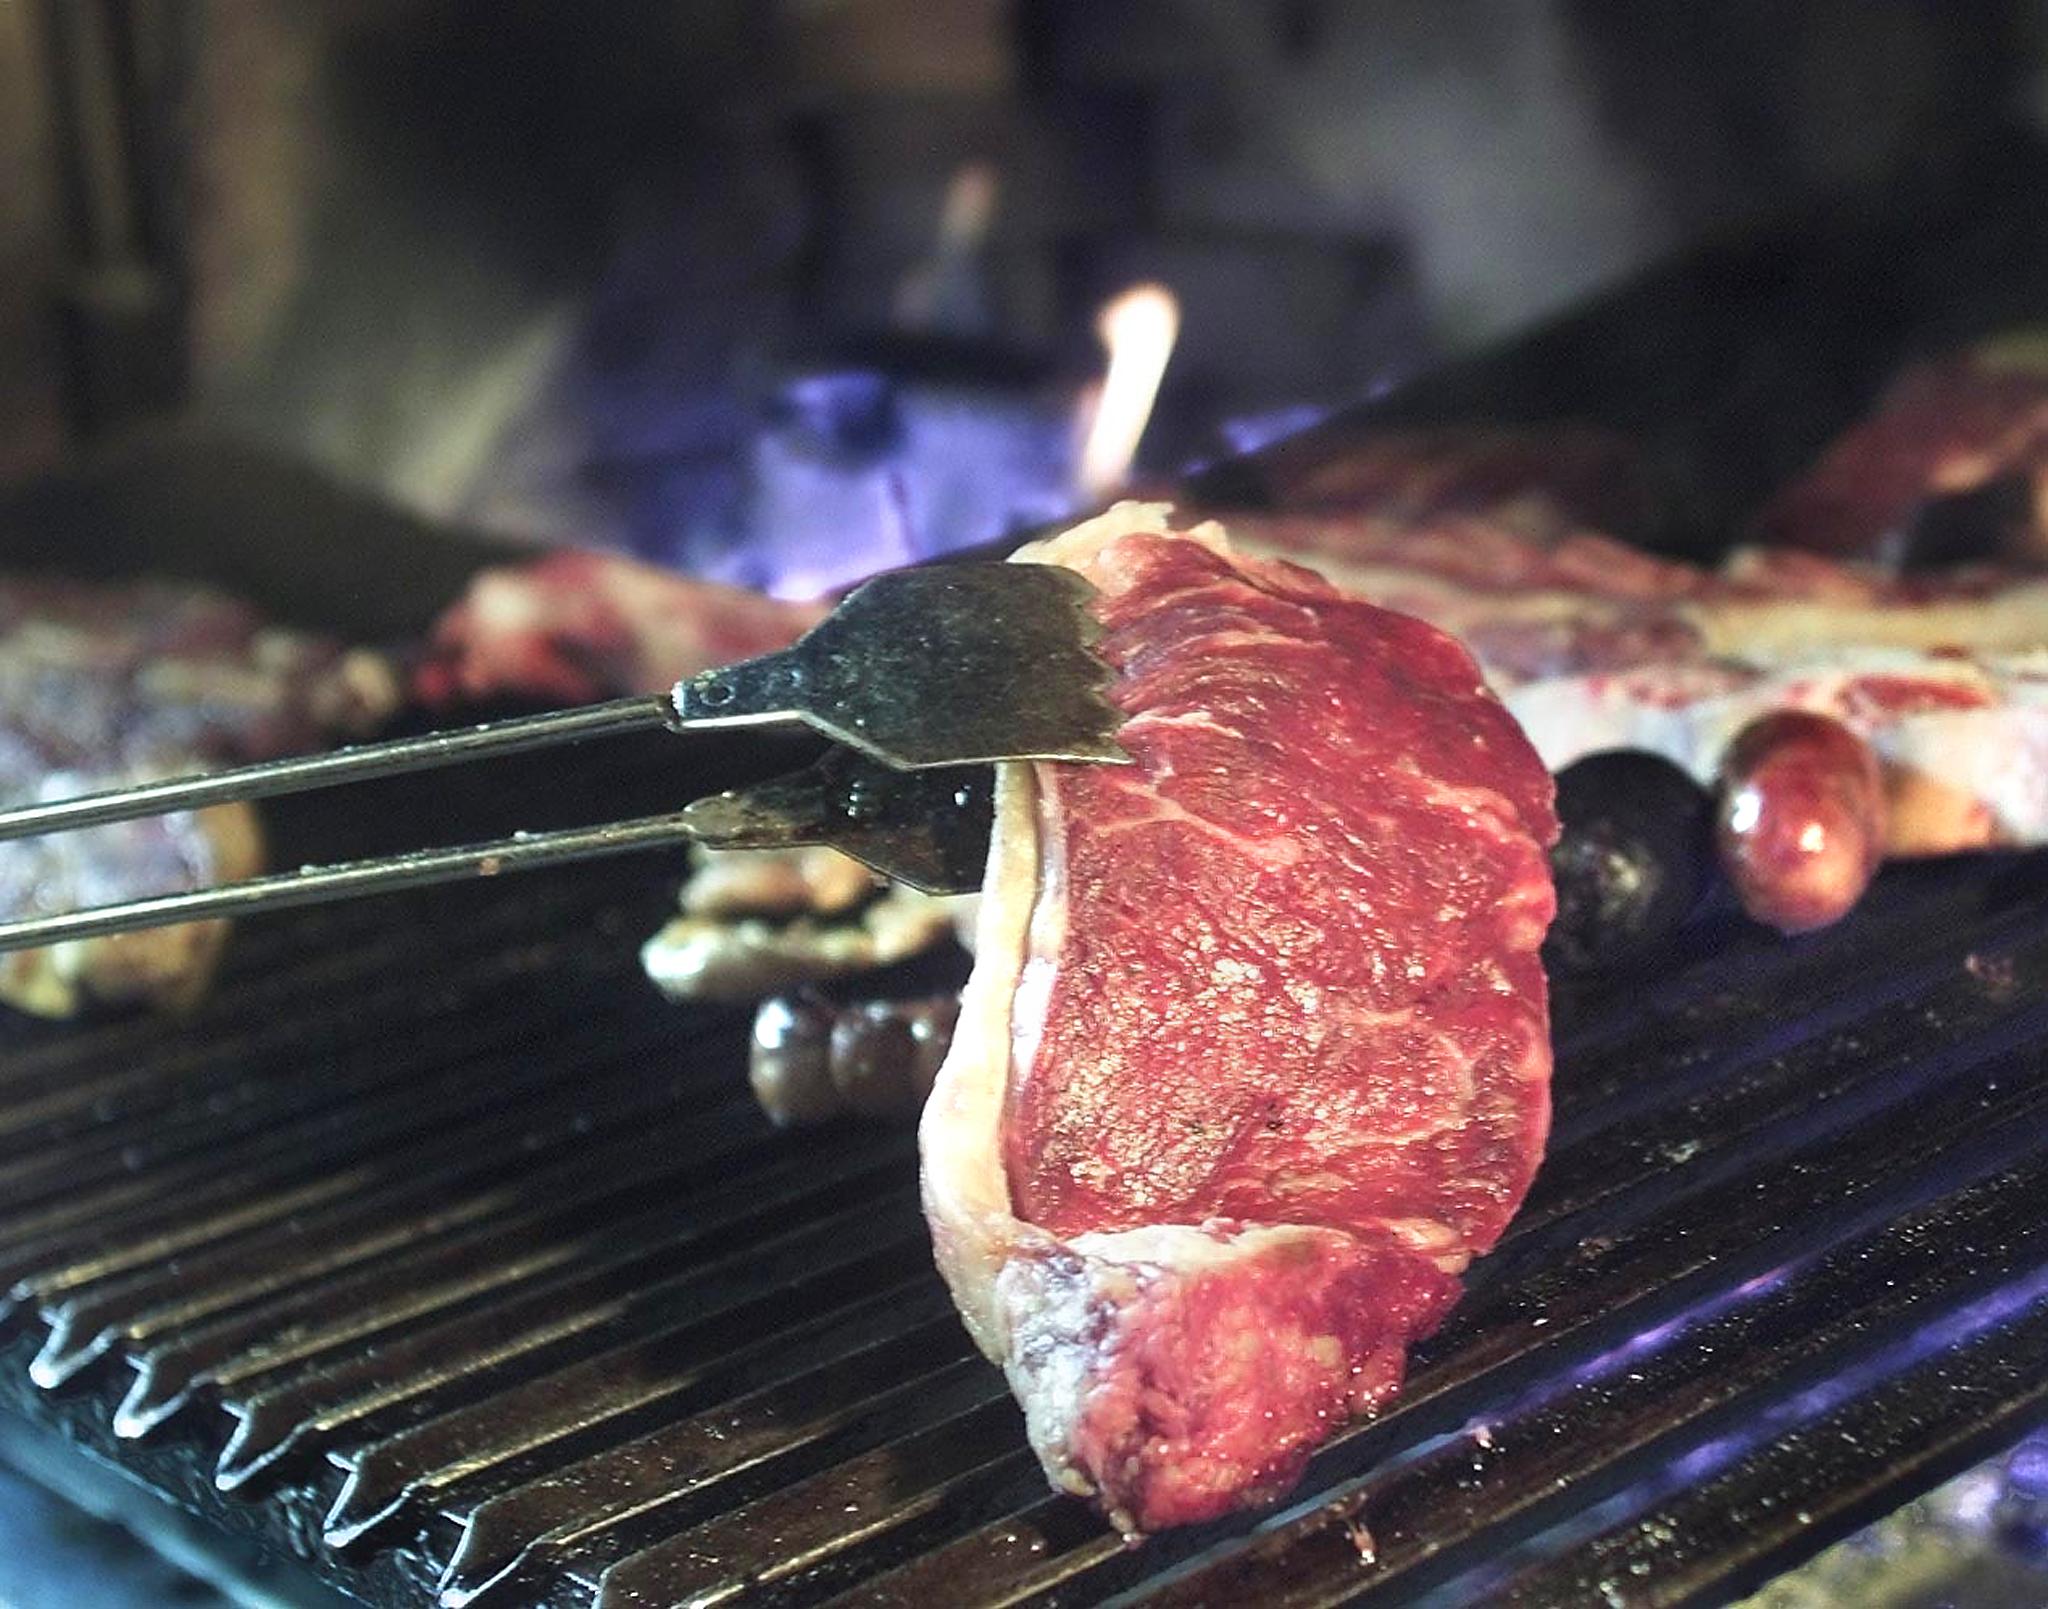 A beef steak is put on the grill of a barbecue restaurant. The World Health Organization said cooking red meat at high temperatures (as in barbecuing or pan-frying) produces certain types of carcinogenic chemicals, and they classified its consumption in the same category as tobacco.